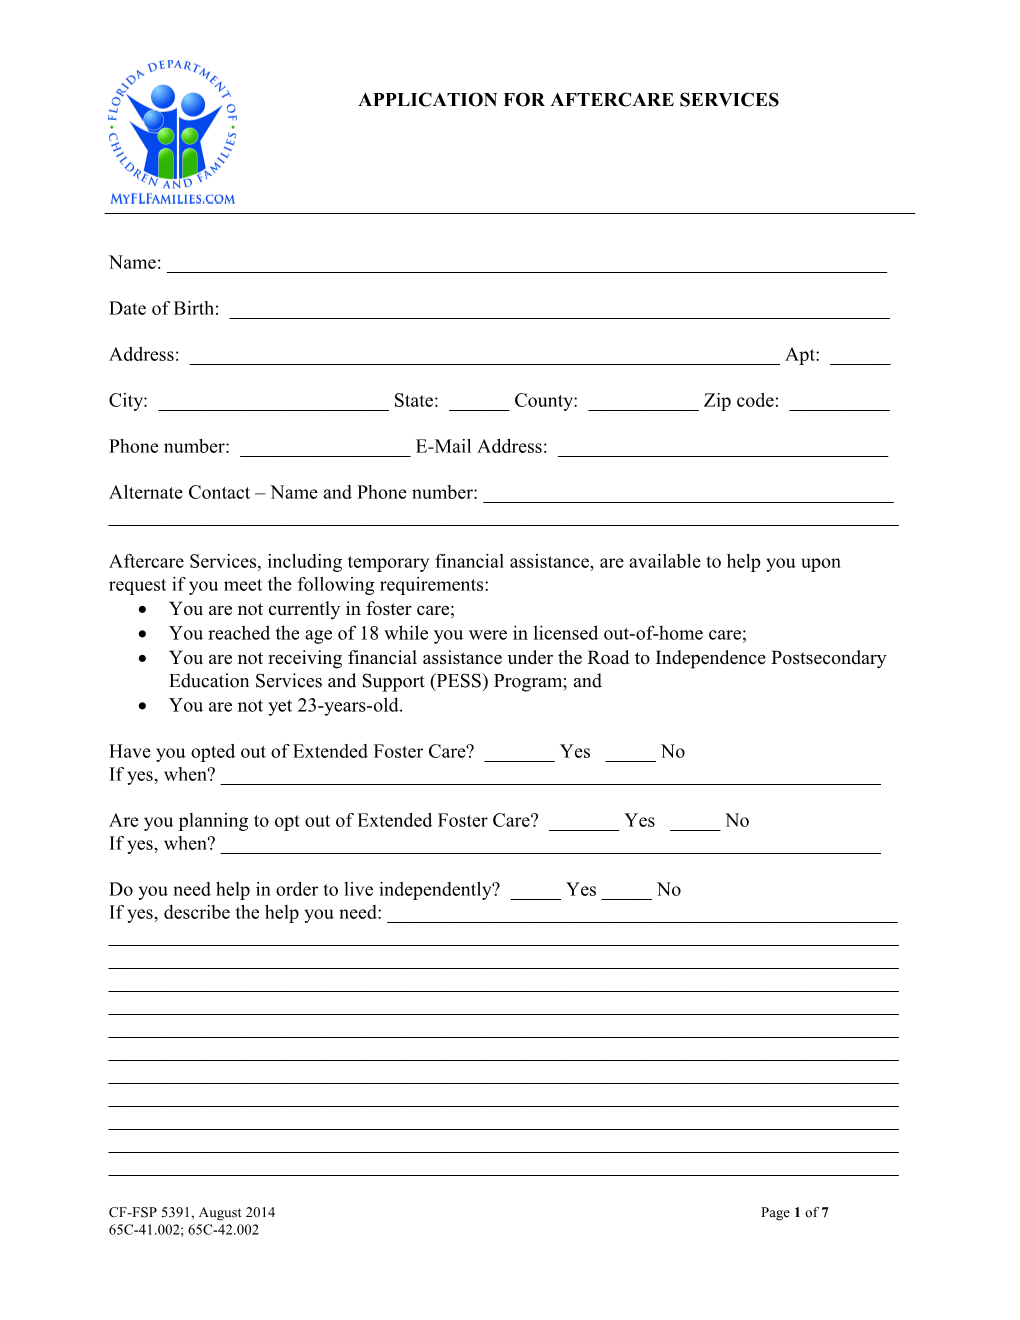 Application for Aftercare Services